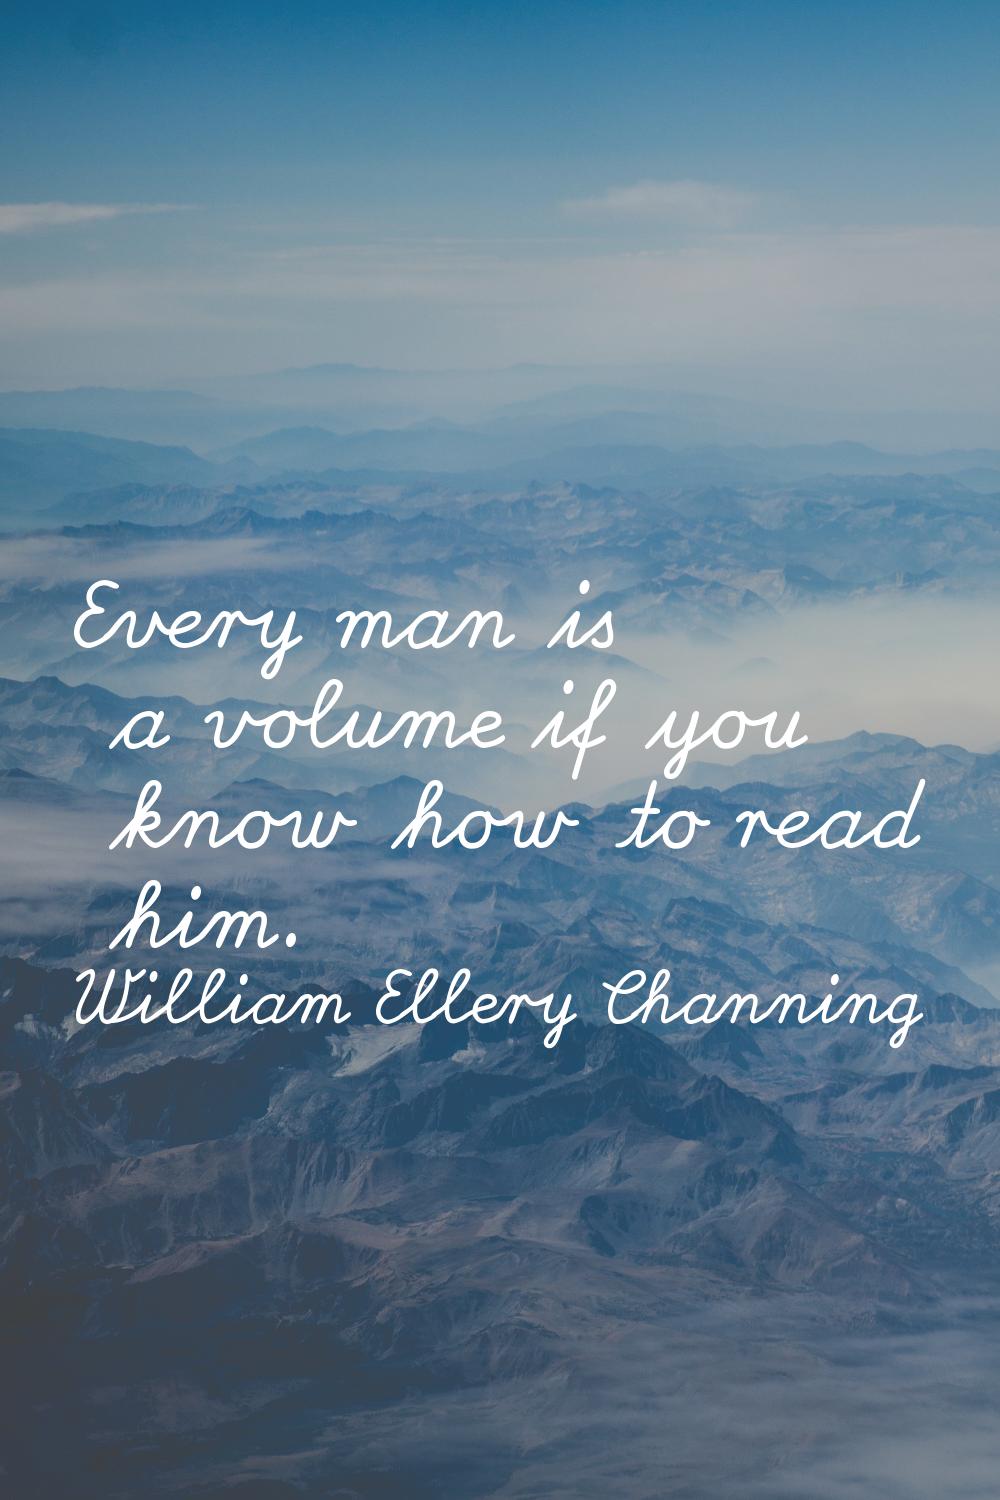 Every man is a volume if you know how to read him.